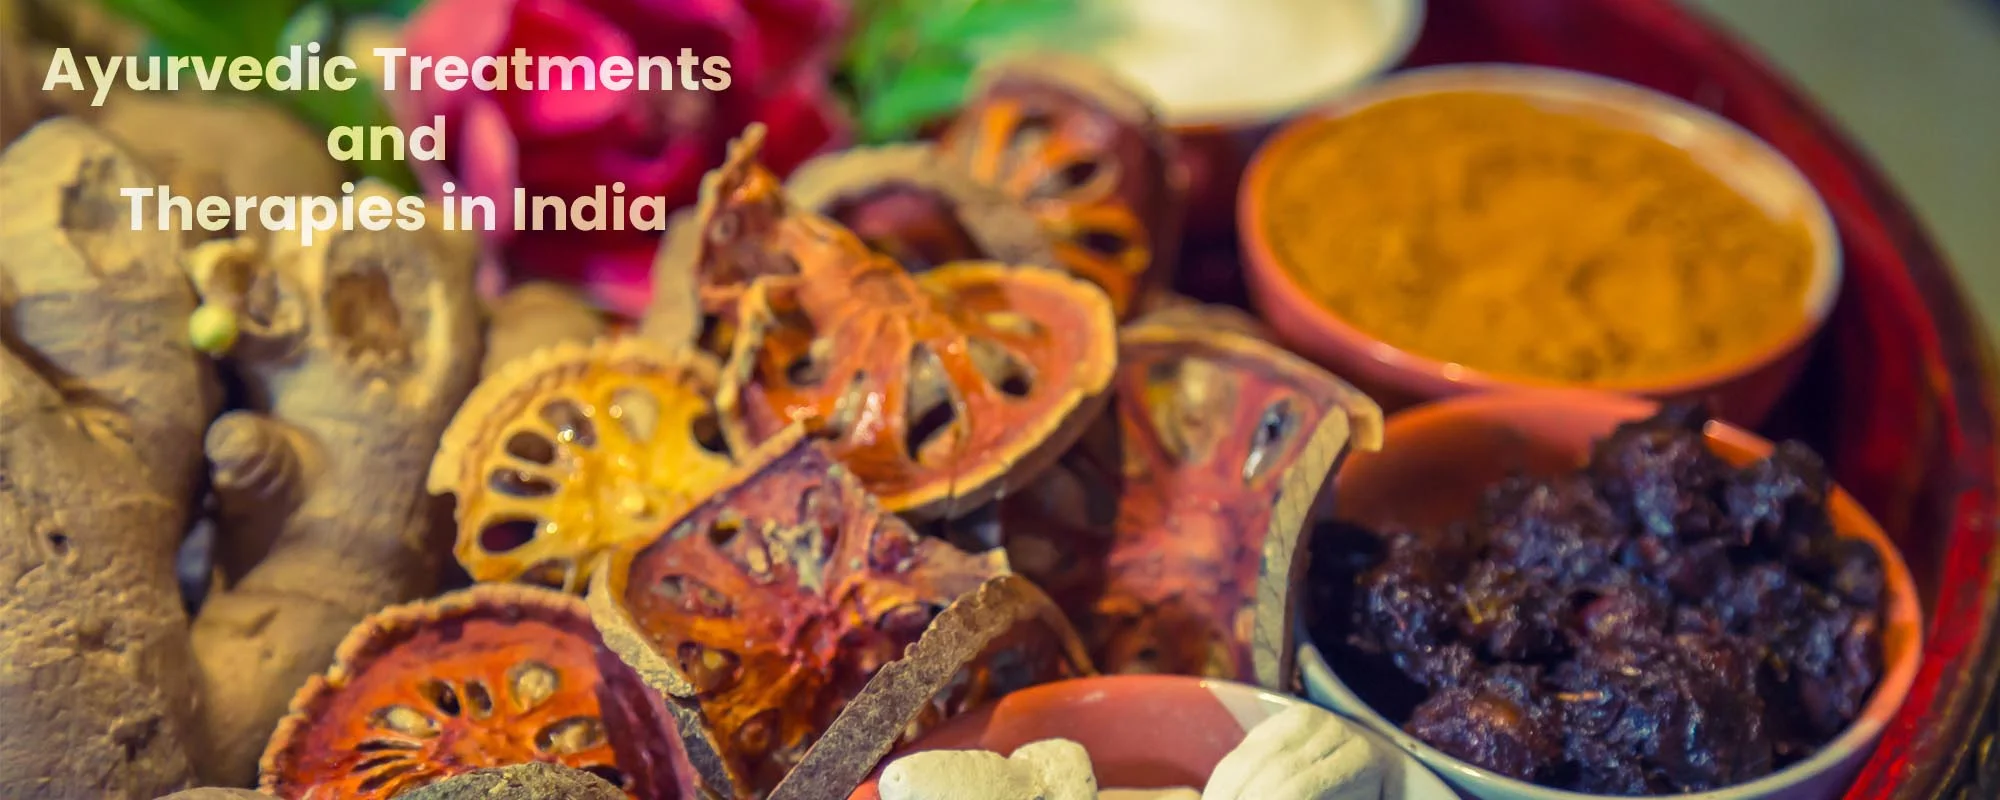 Ayurvedic Treatments and Therapies In India